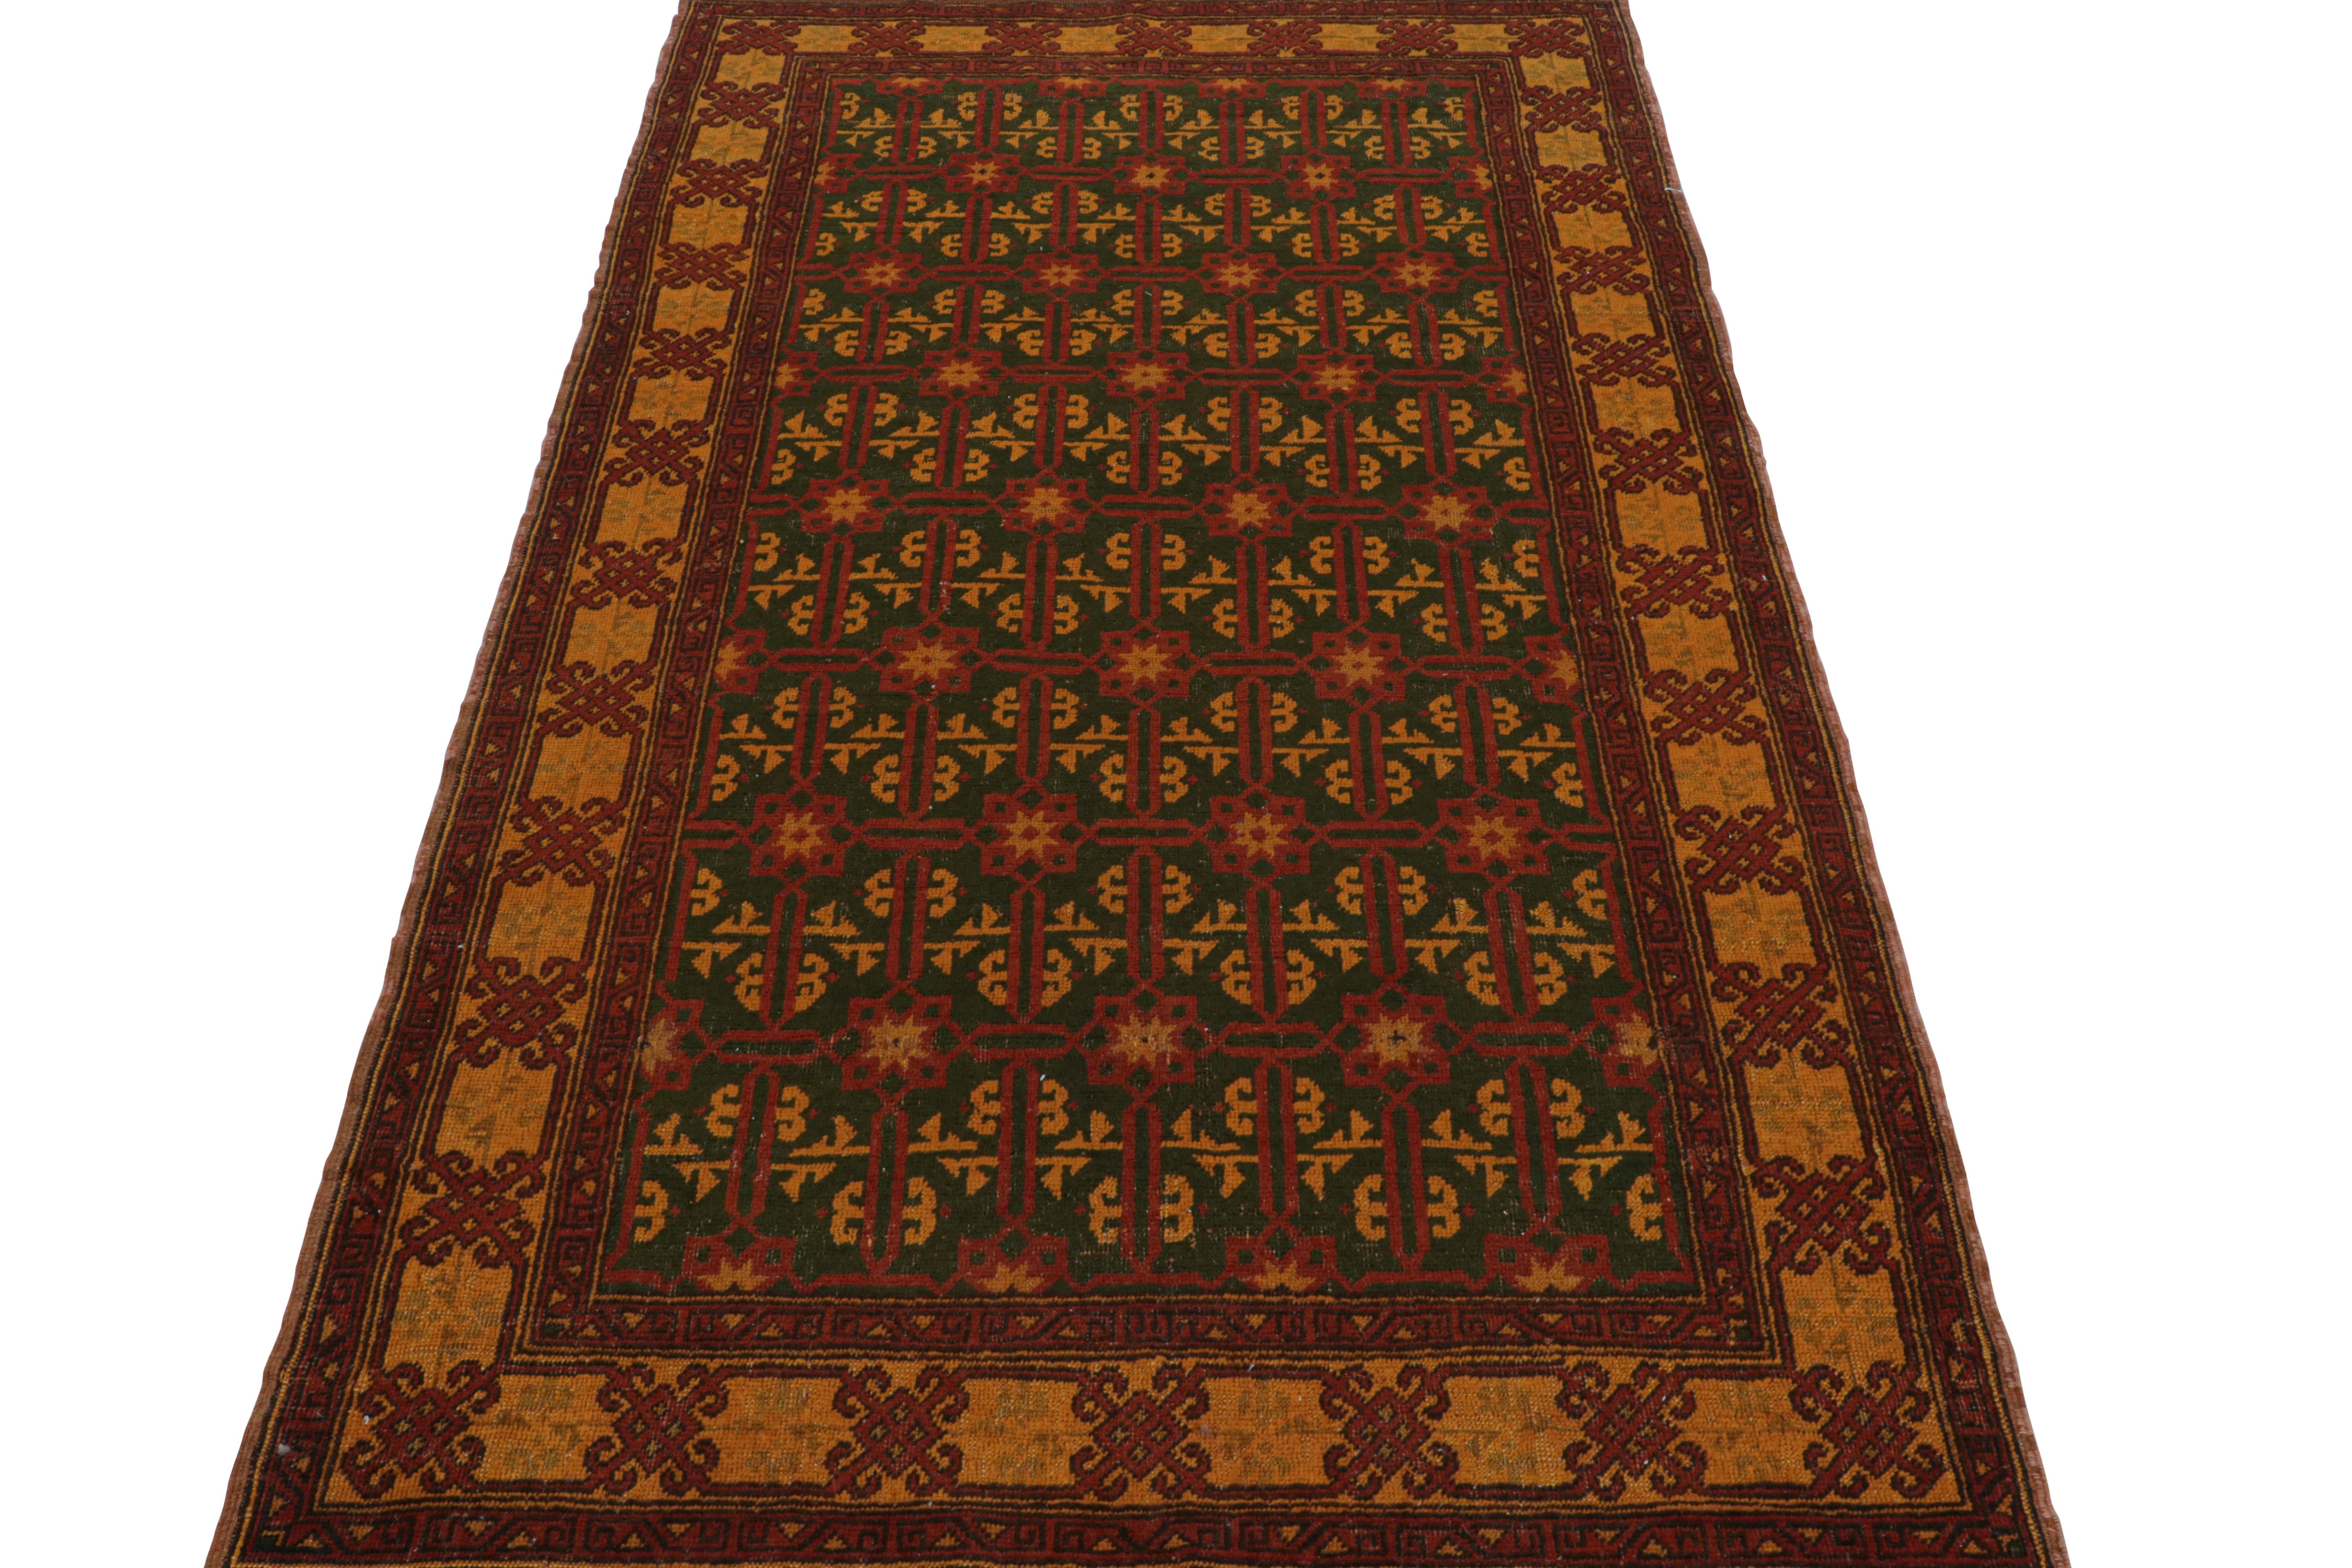 Tribal Vintage Mid-Century Geometric Floral Red And Green Wool Rug - Orange-Brown Accen For Sale